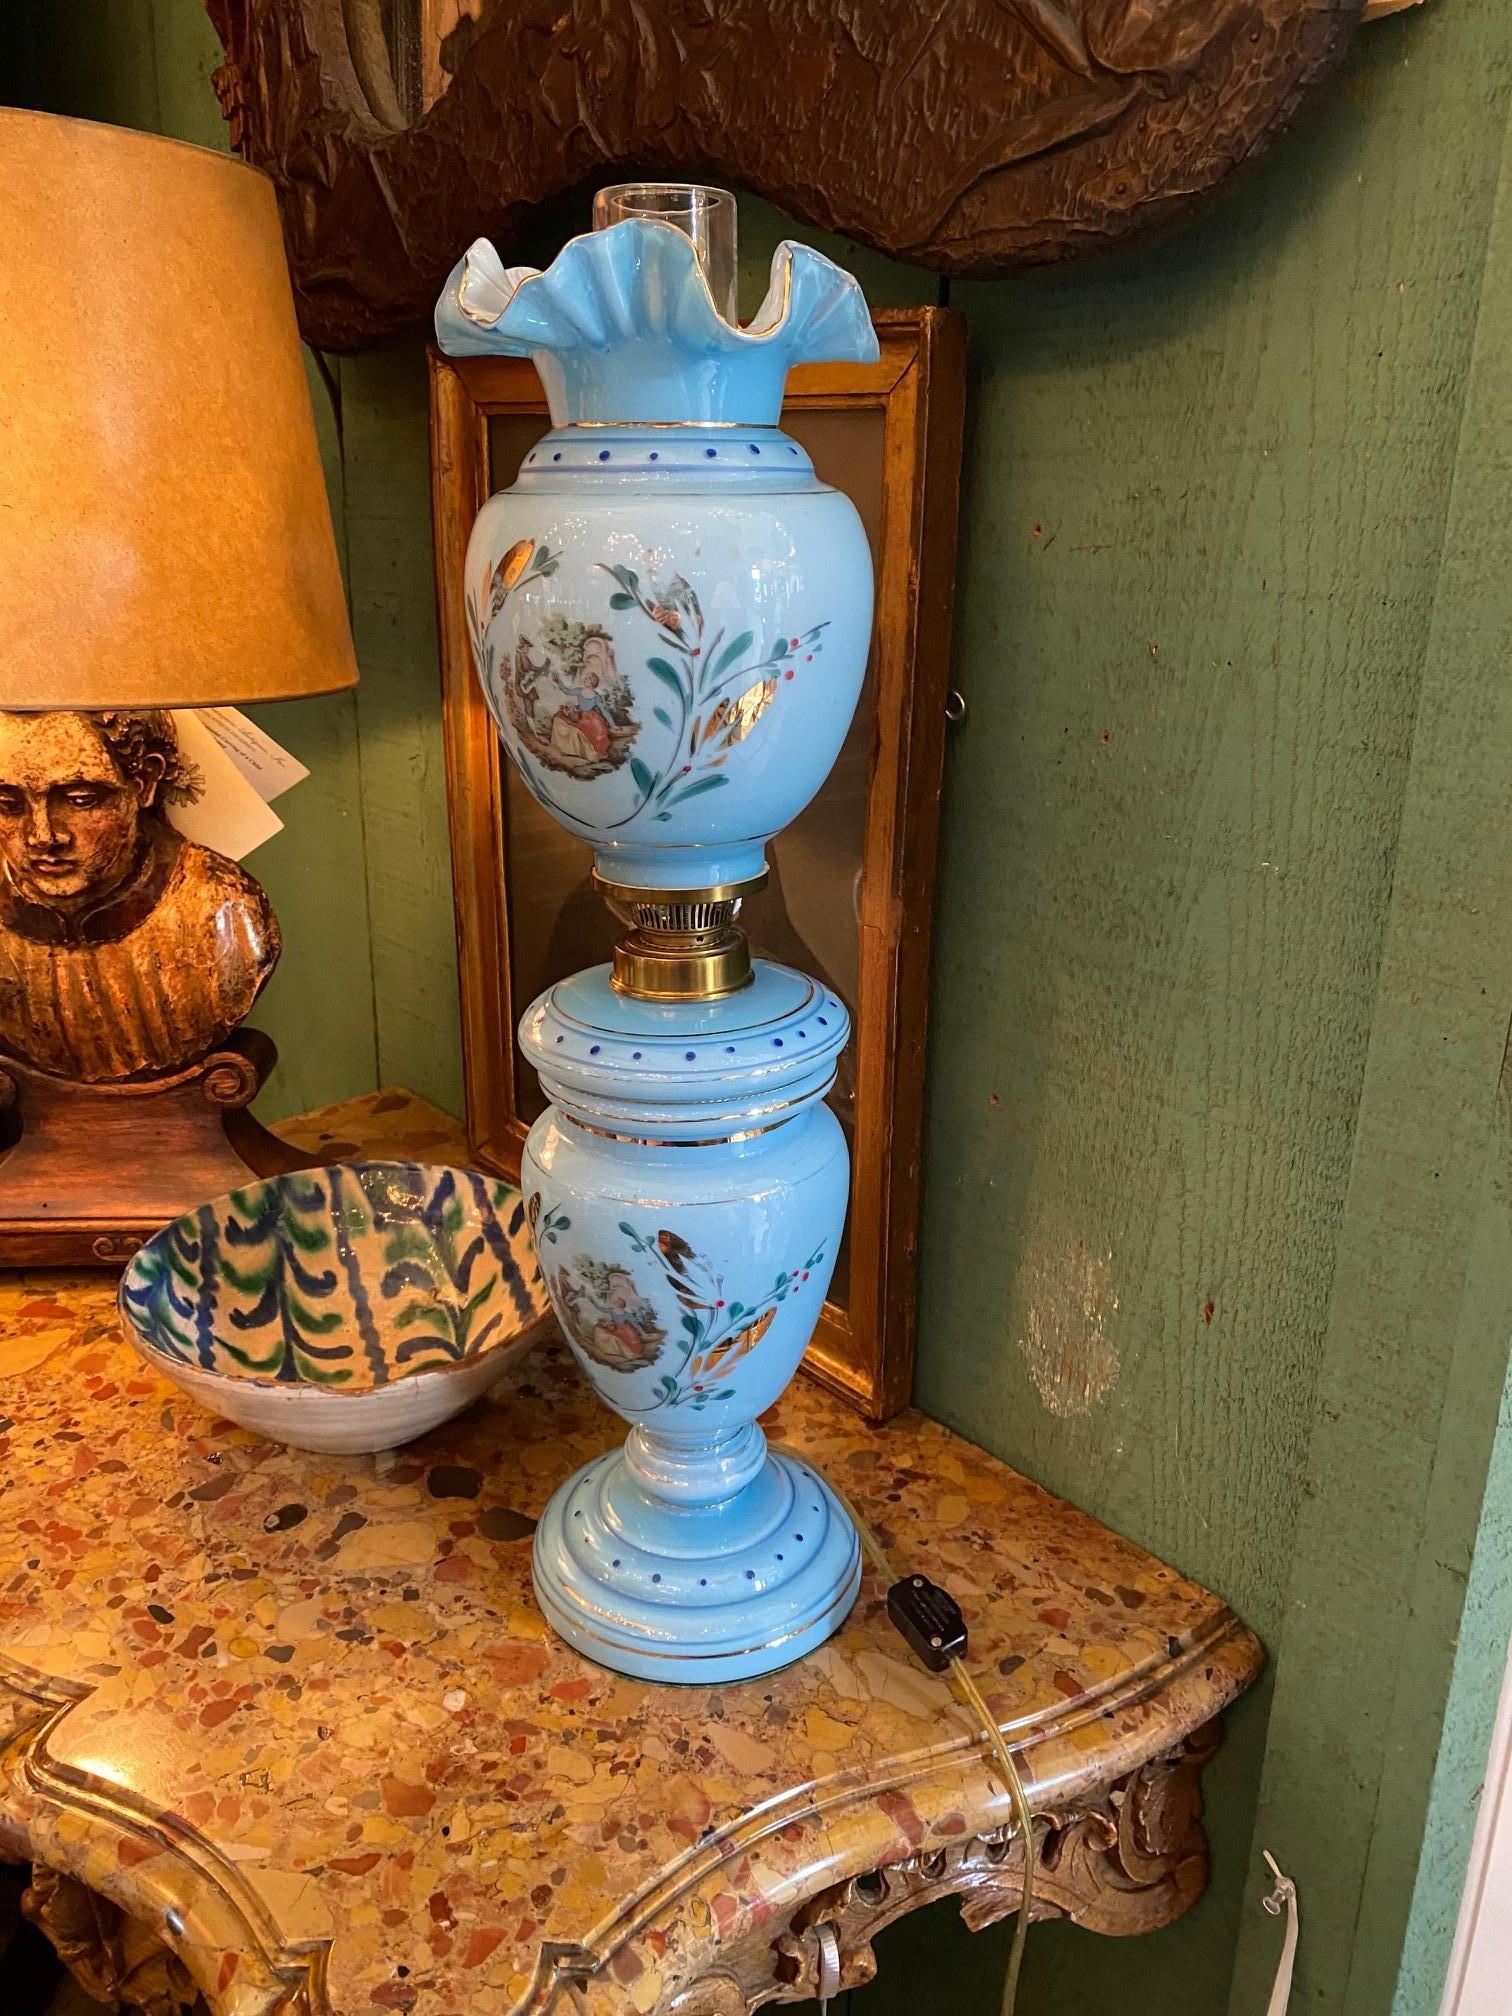 Blue Opaline Glass Side Table Mood Soft Light Lamp Vase Urn Form Decorative CA . Early 19th century rare translucent opaline glass. Period Charles X transition Louis Philippe table petroleum lamp. Baby blue with gold and a hand painted tableau at